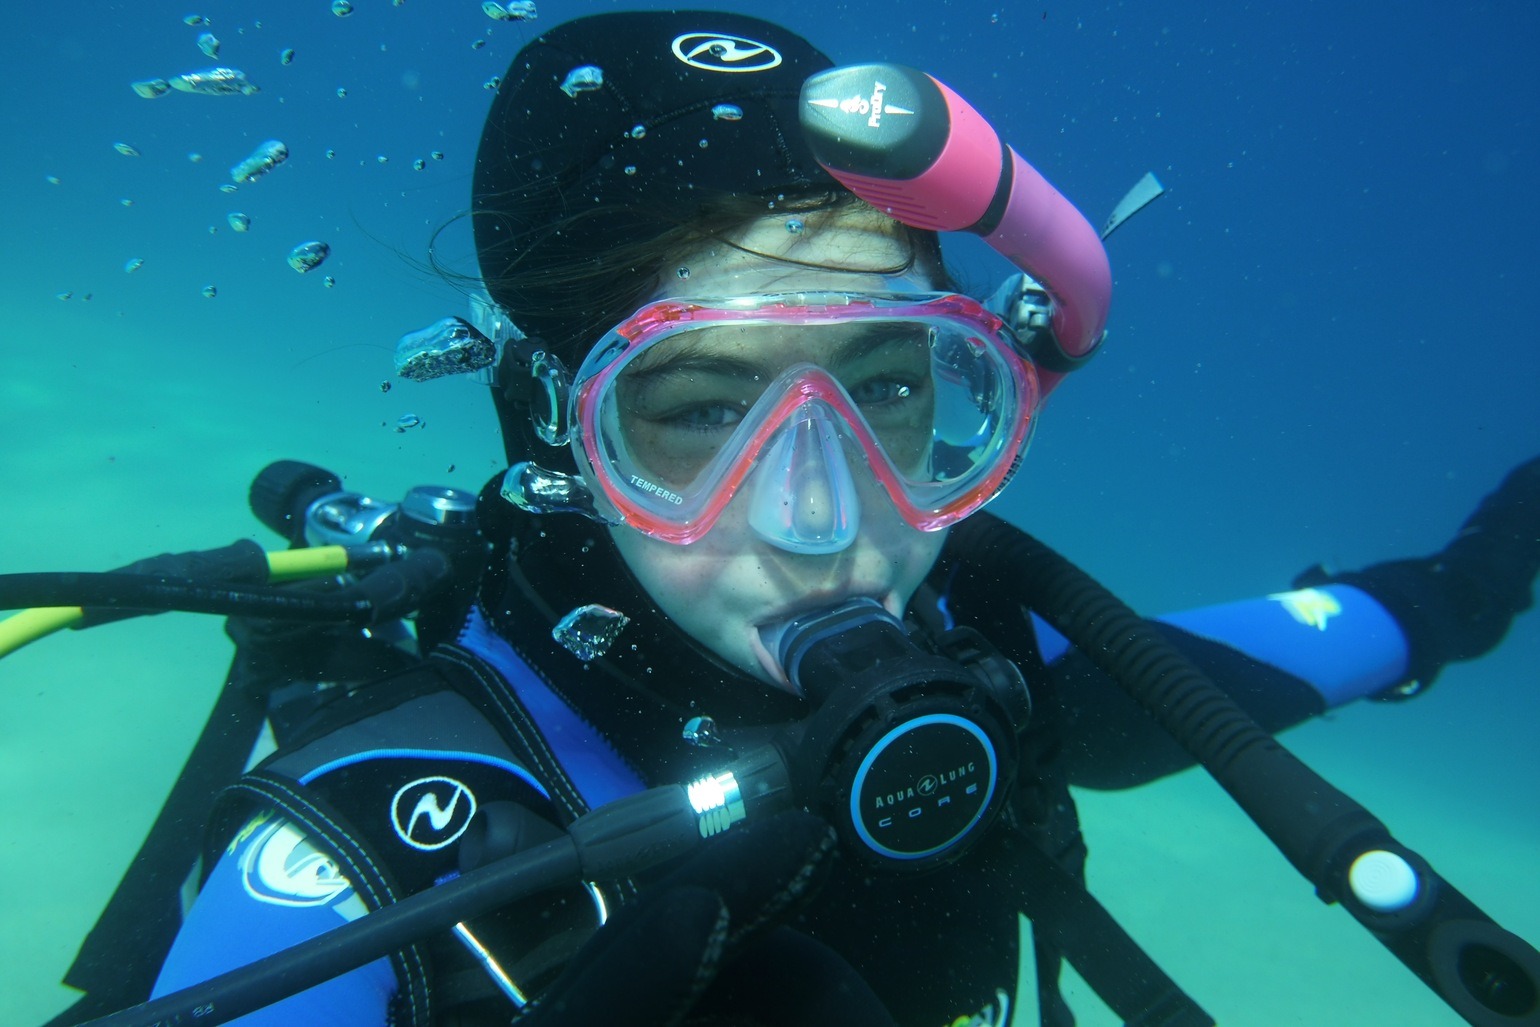 A 12-Year-Old Scuba Diver From Tiburon Shares Her Passion for the Underwater World